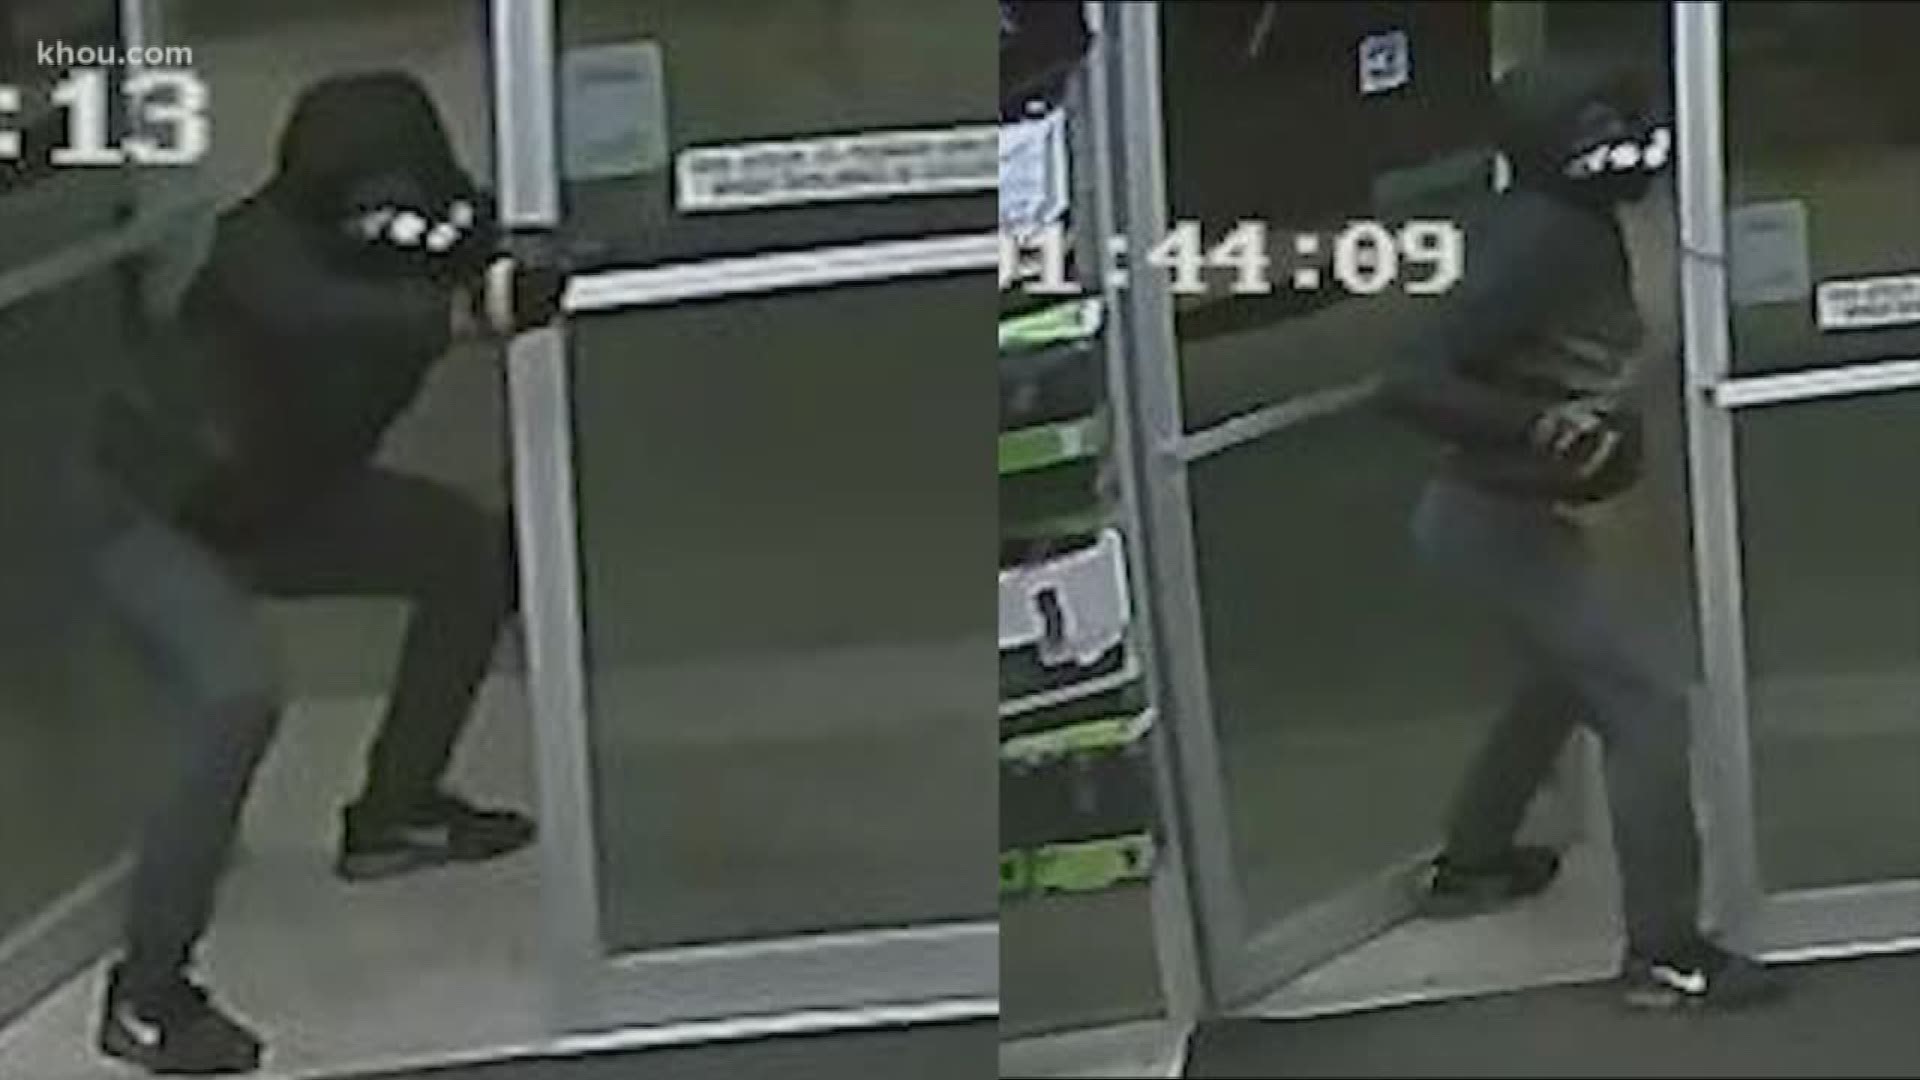 Police are hoping surveillance photos could help catch three suspects who shot and killed a store clerk.